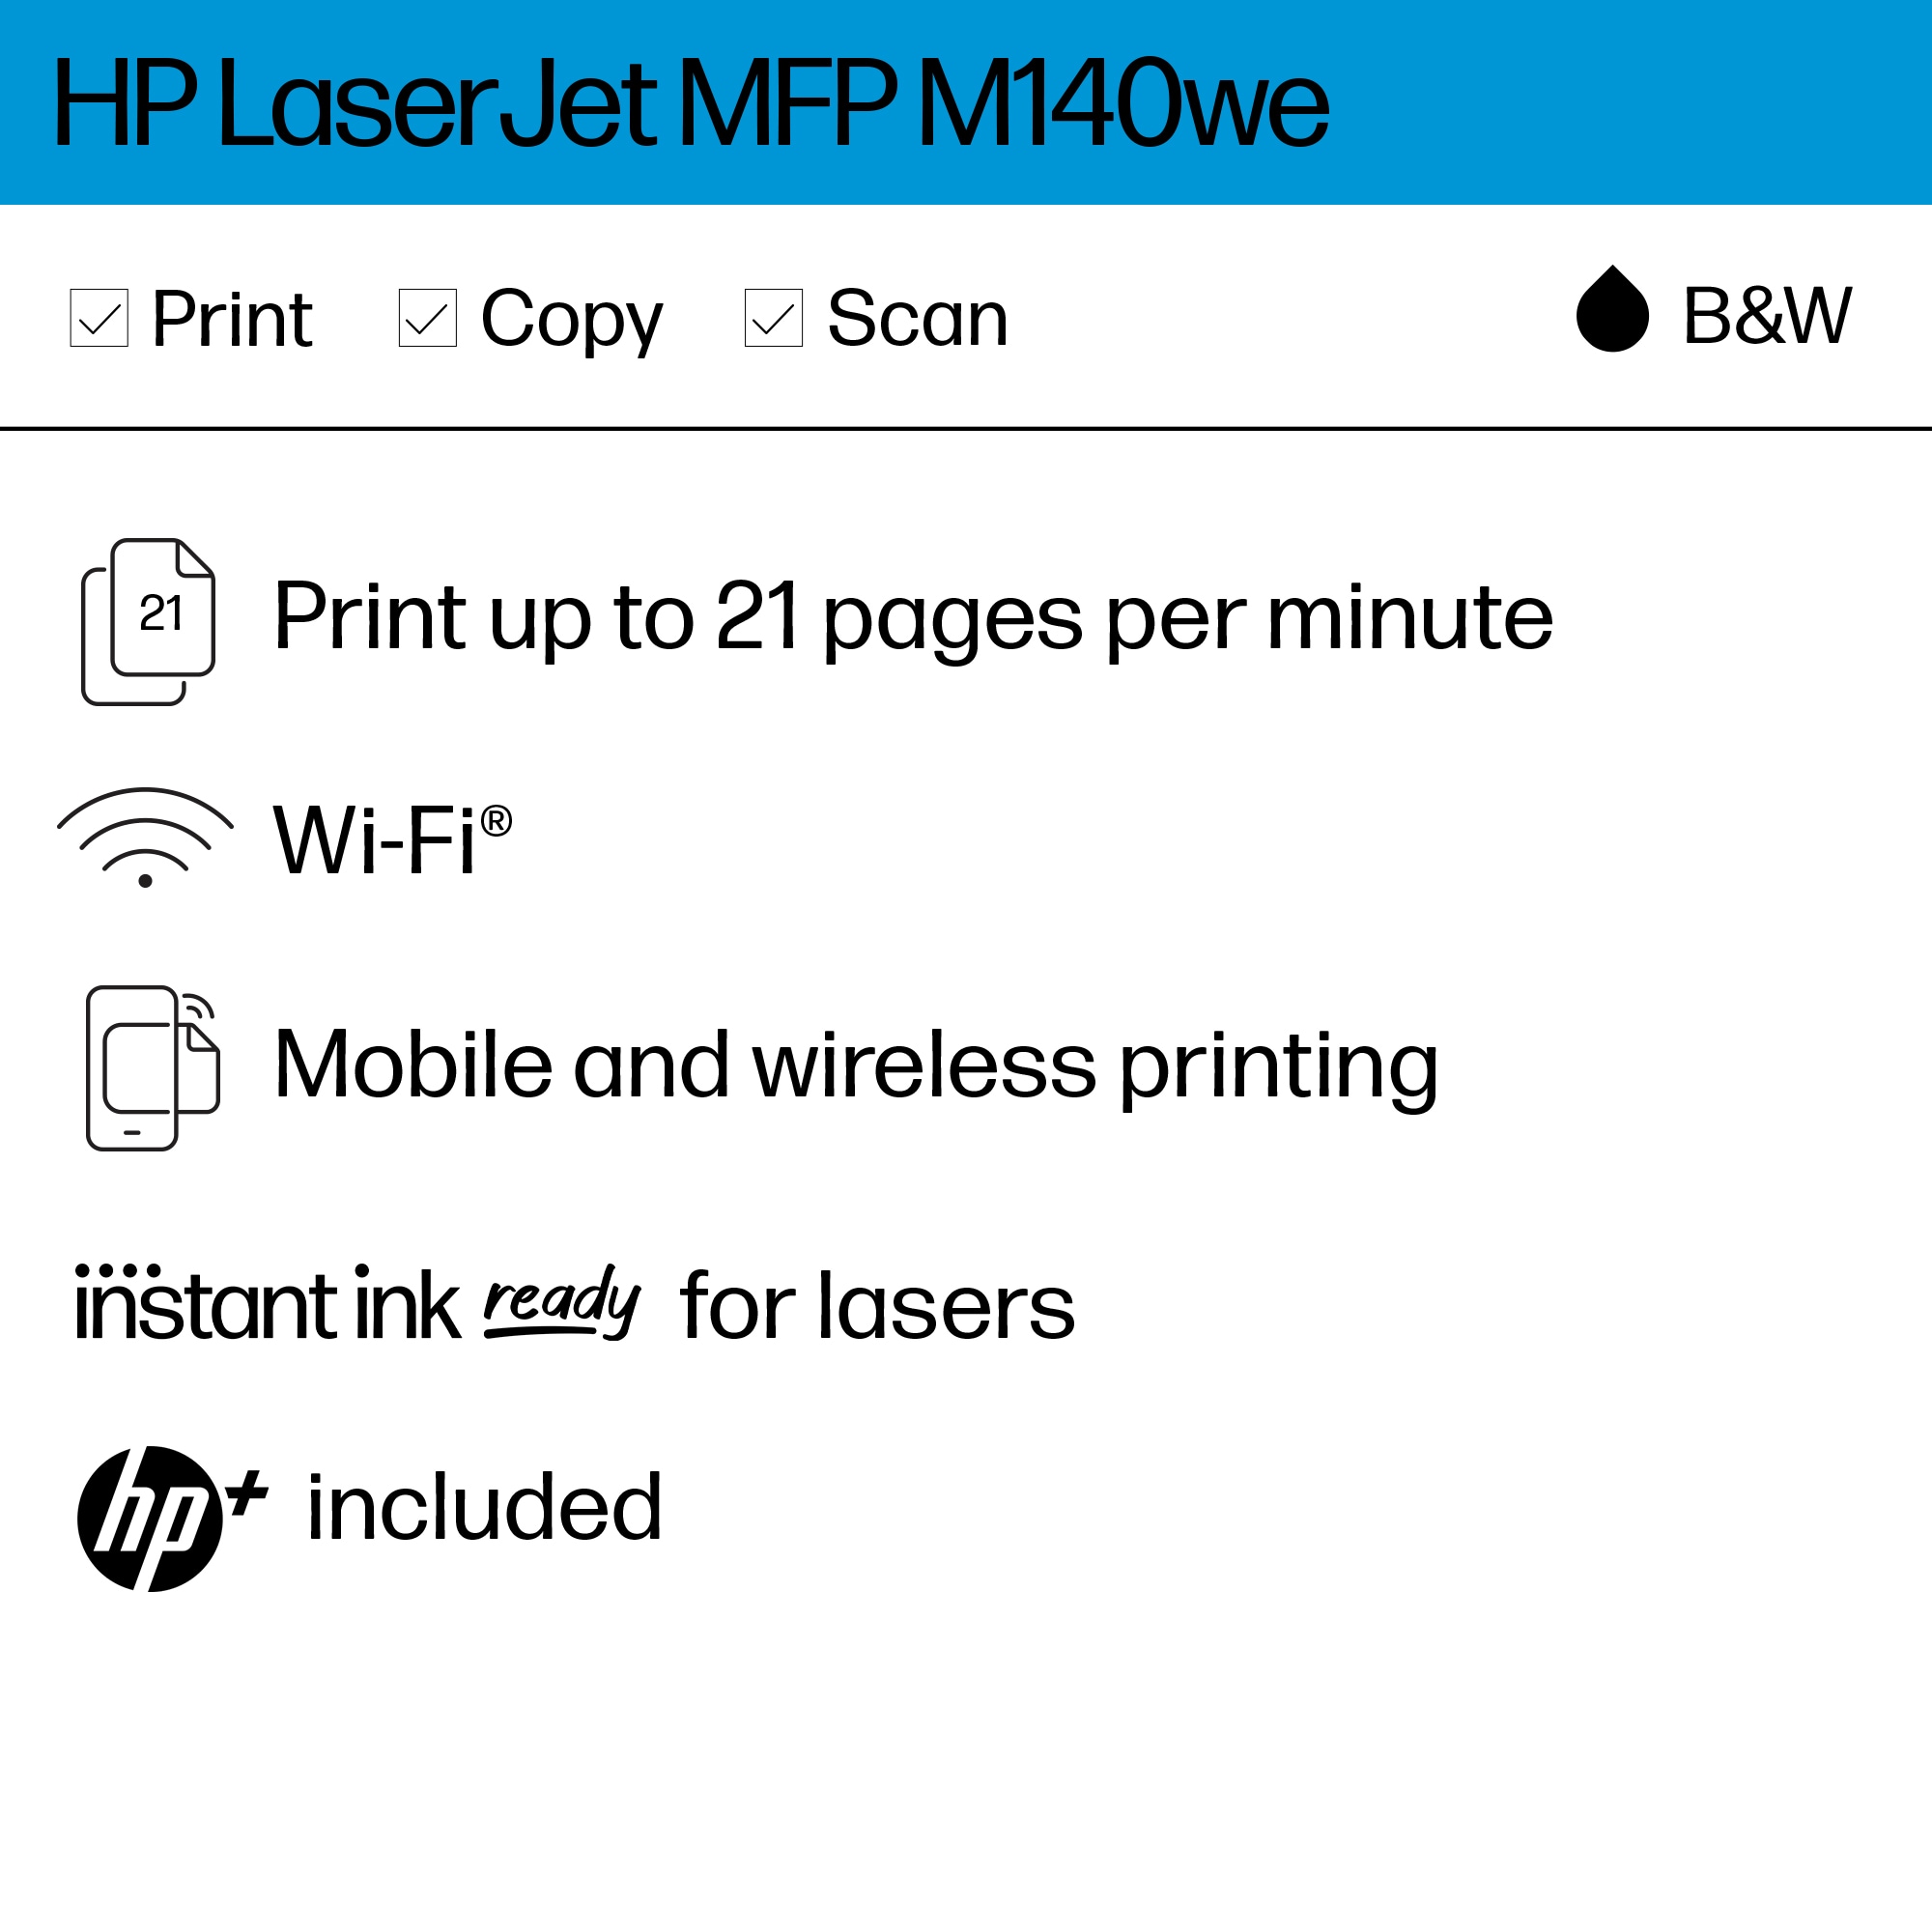 Months HP HP+ with Ink Instant M140we LaserJet Printer and 6